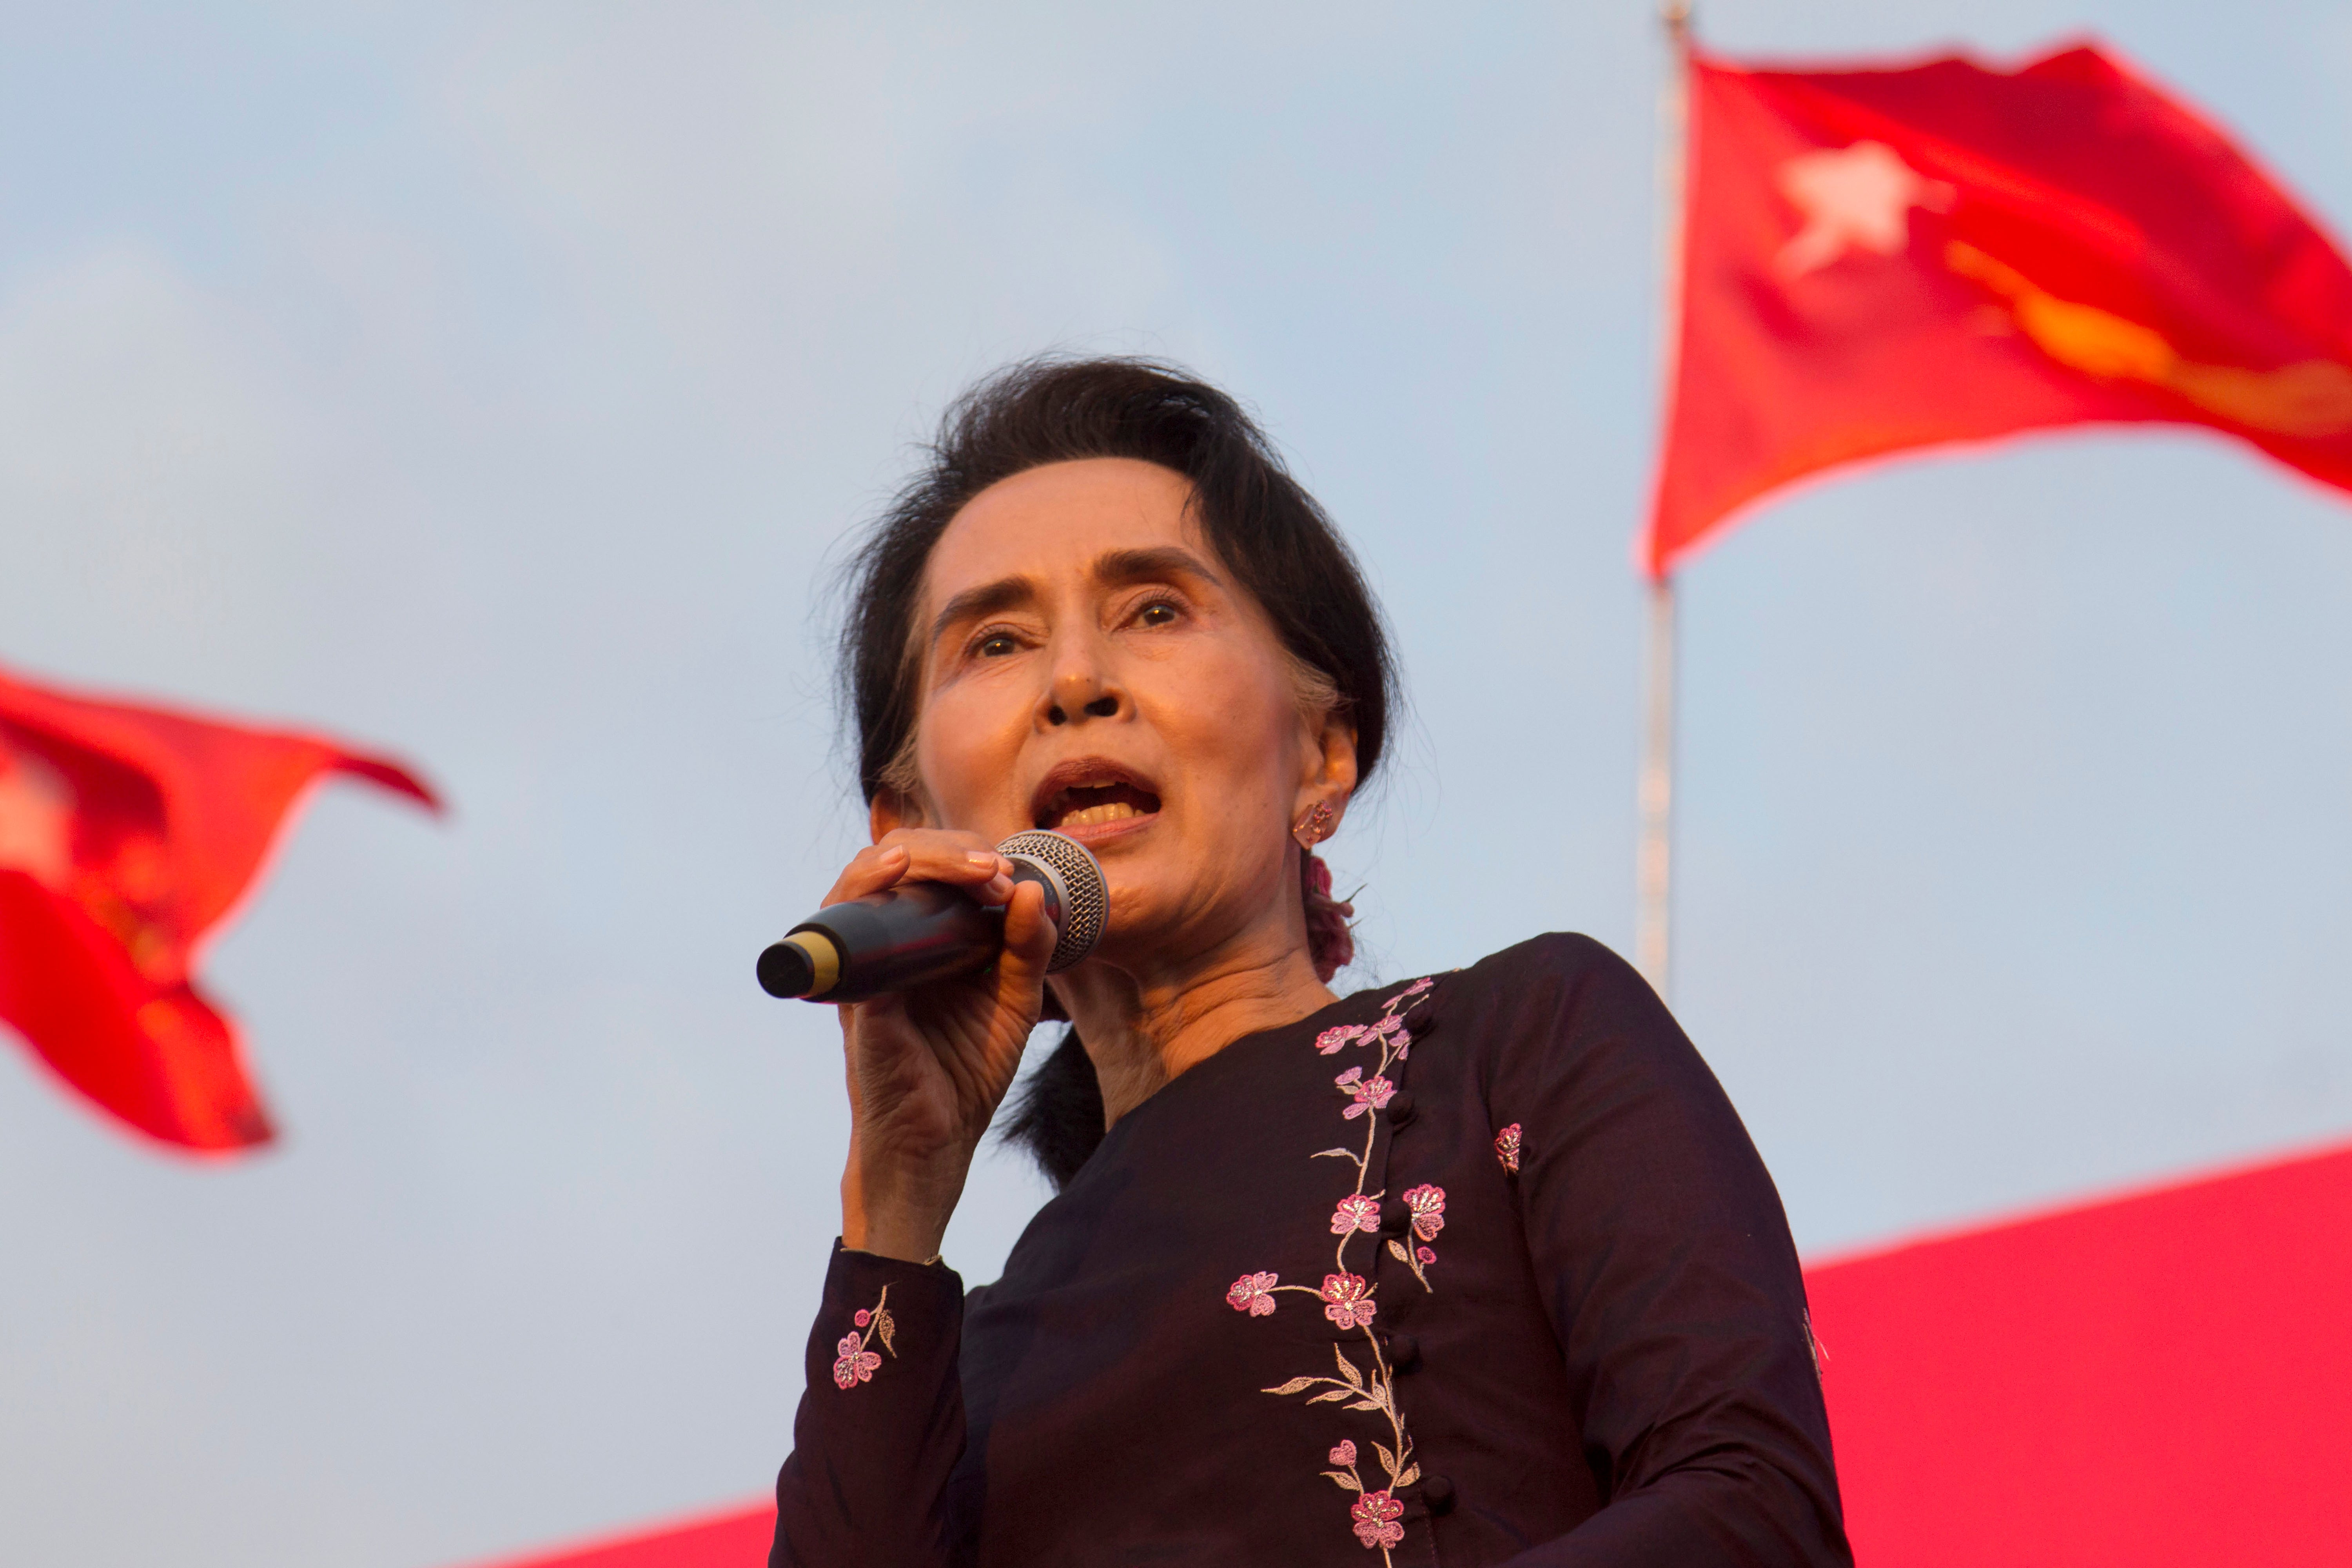 Aung San Suu Kyi hasn’t been seen in public since the coup in February